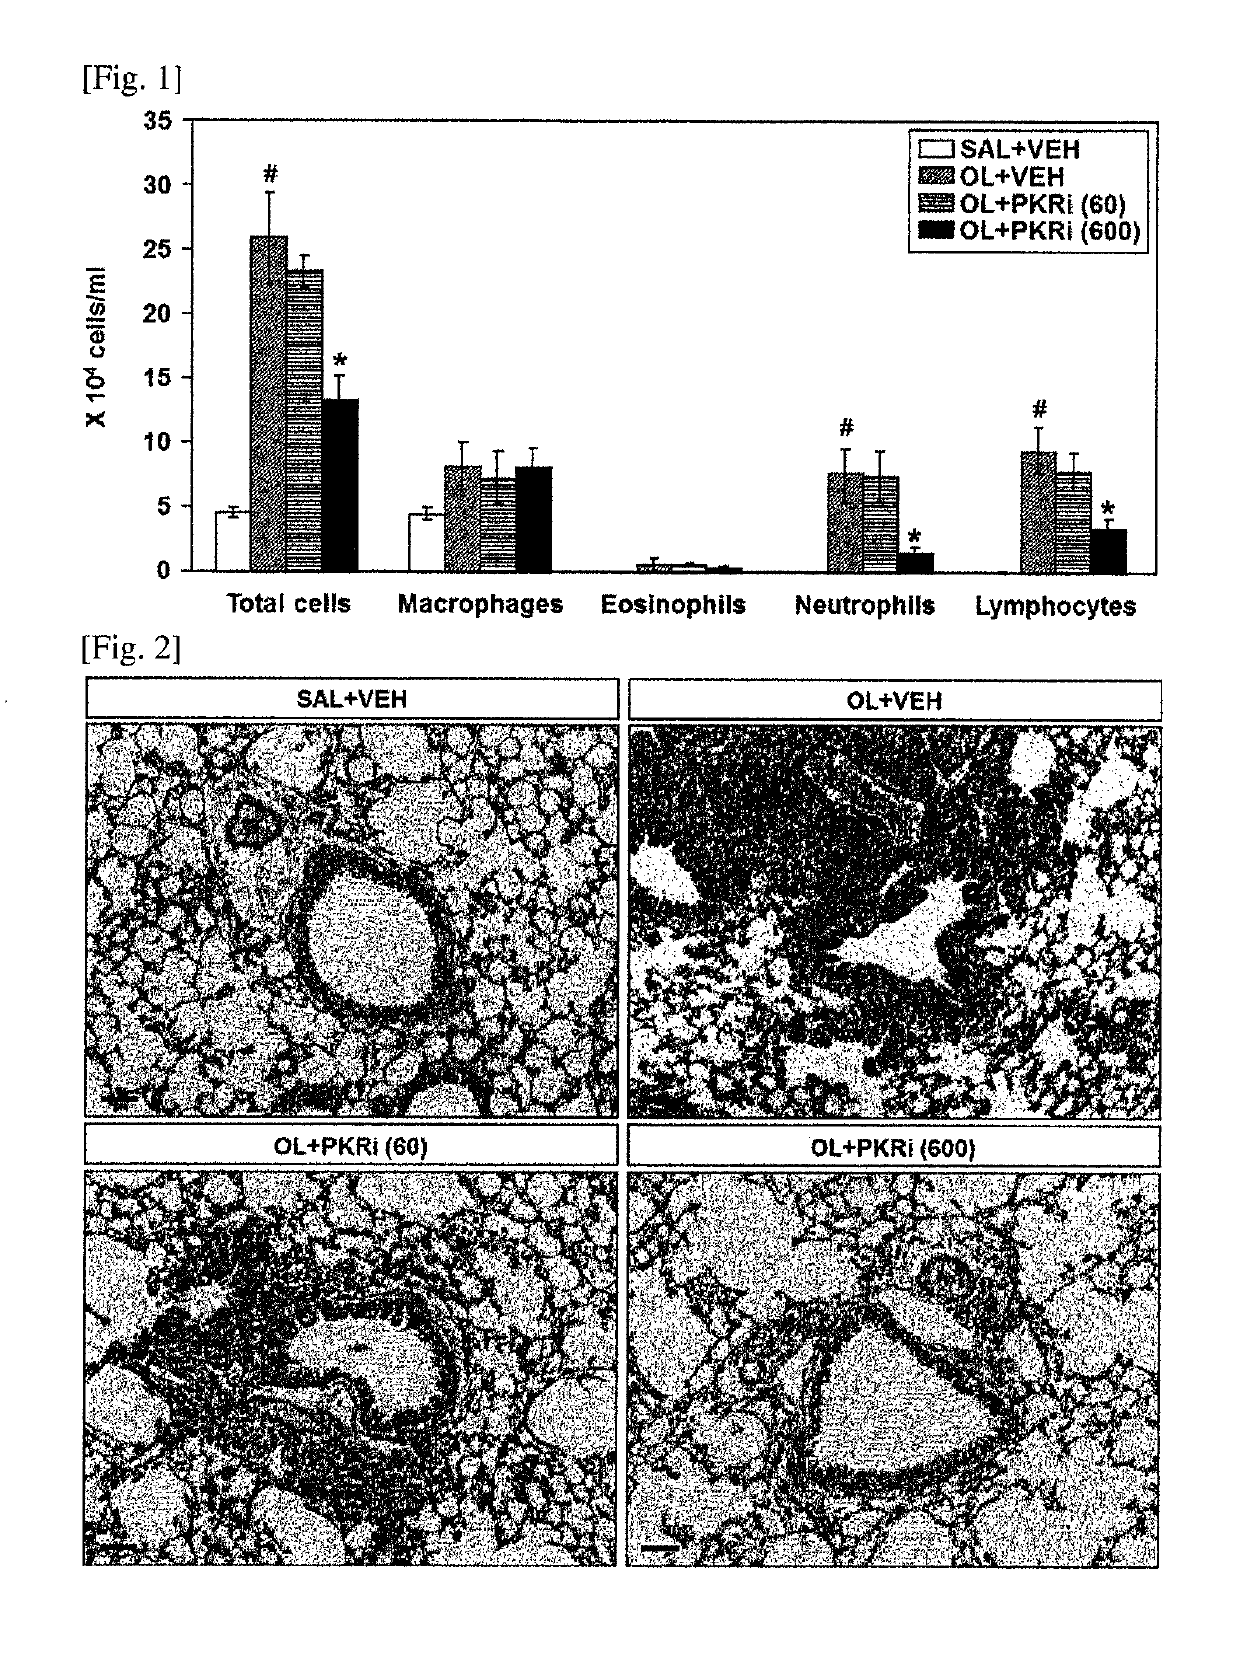 Composition for prevention or treatment of bronchial asthma comprising PKR inhibitor as active ingredient